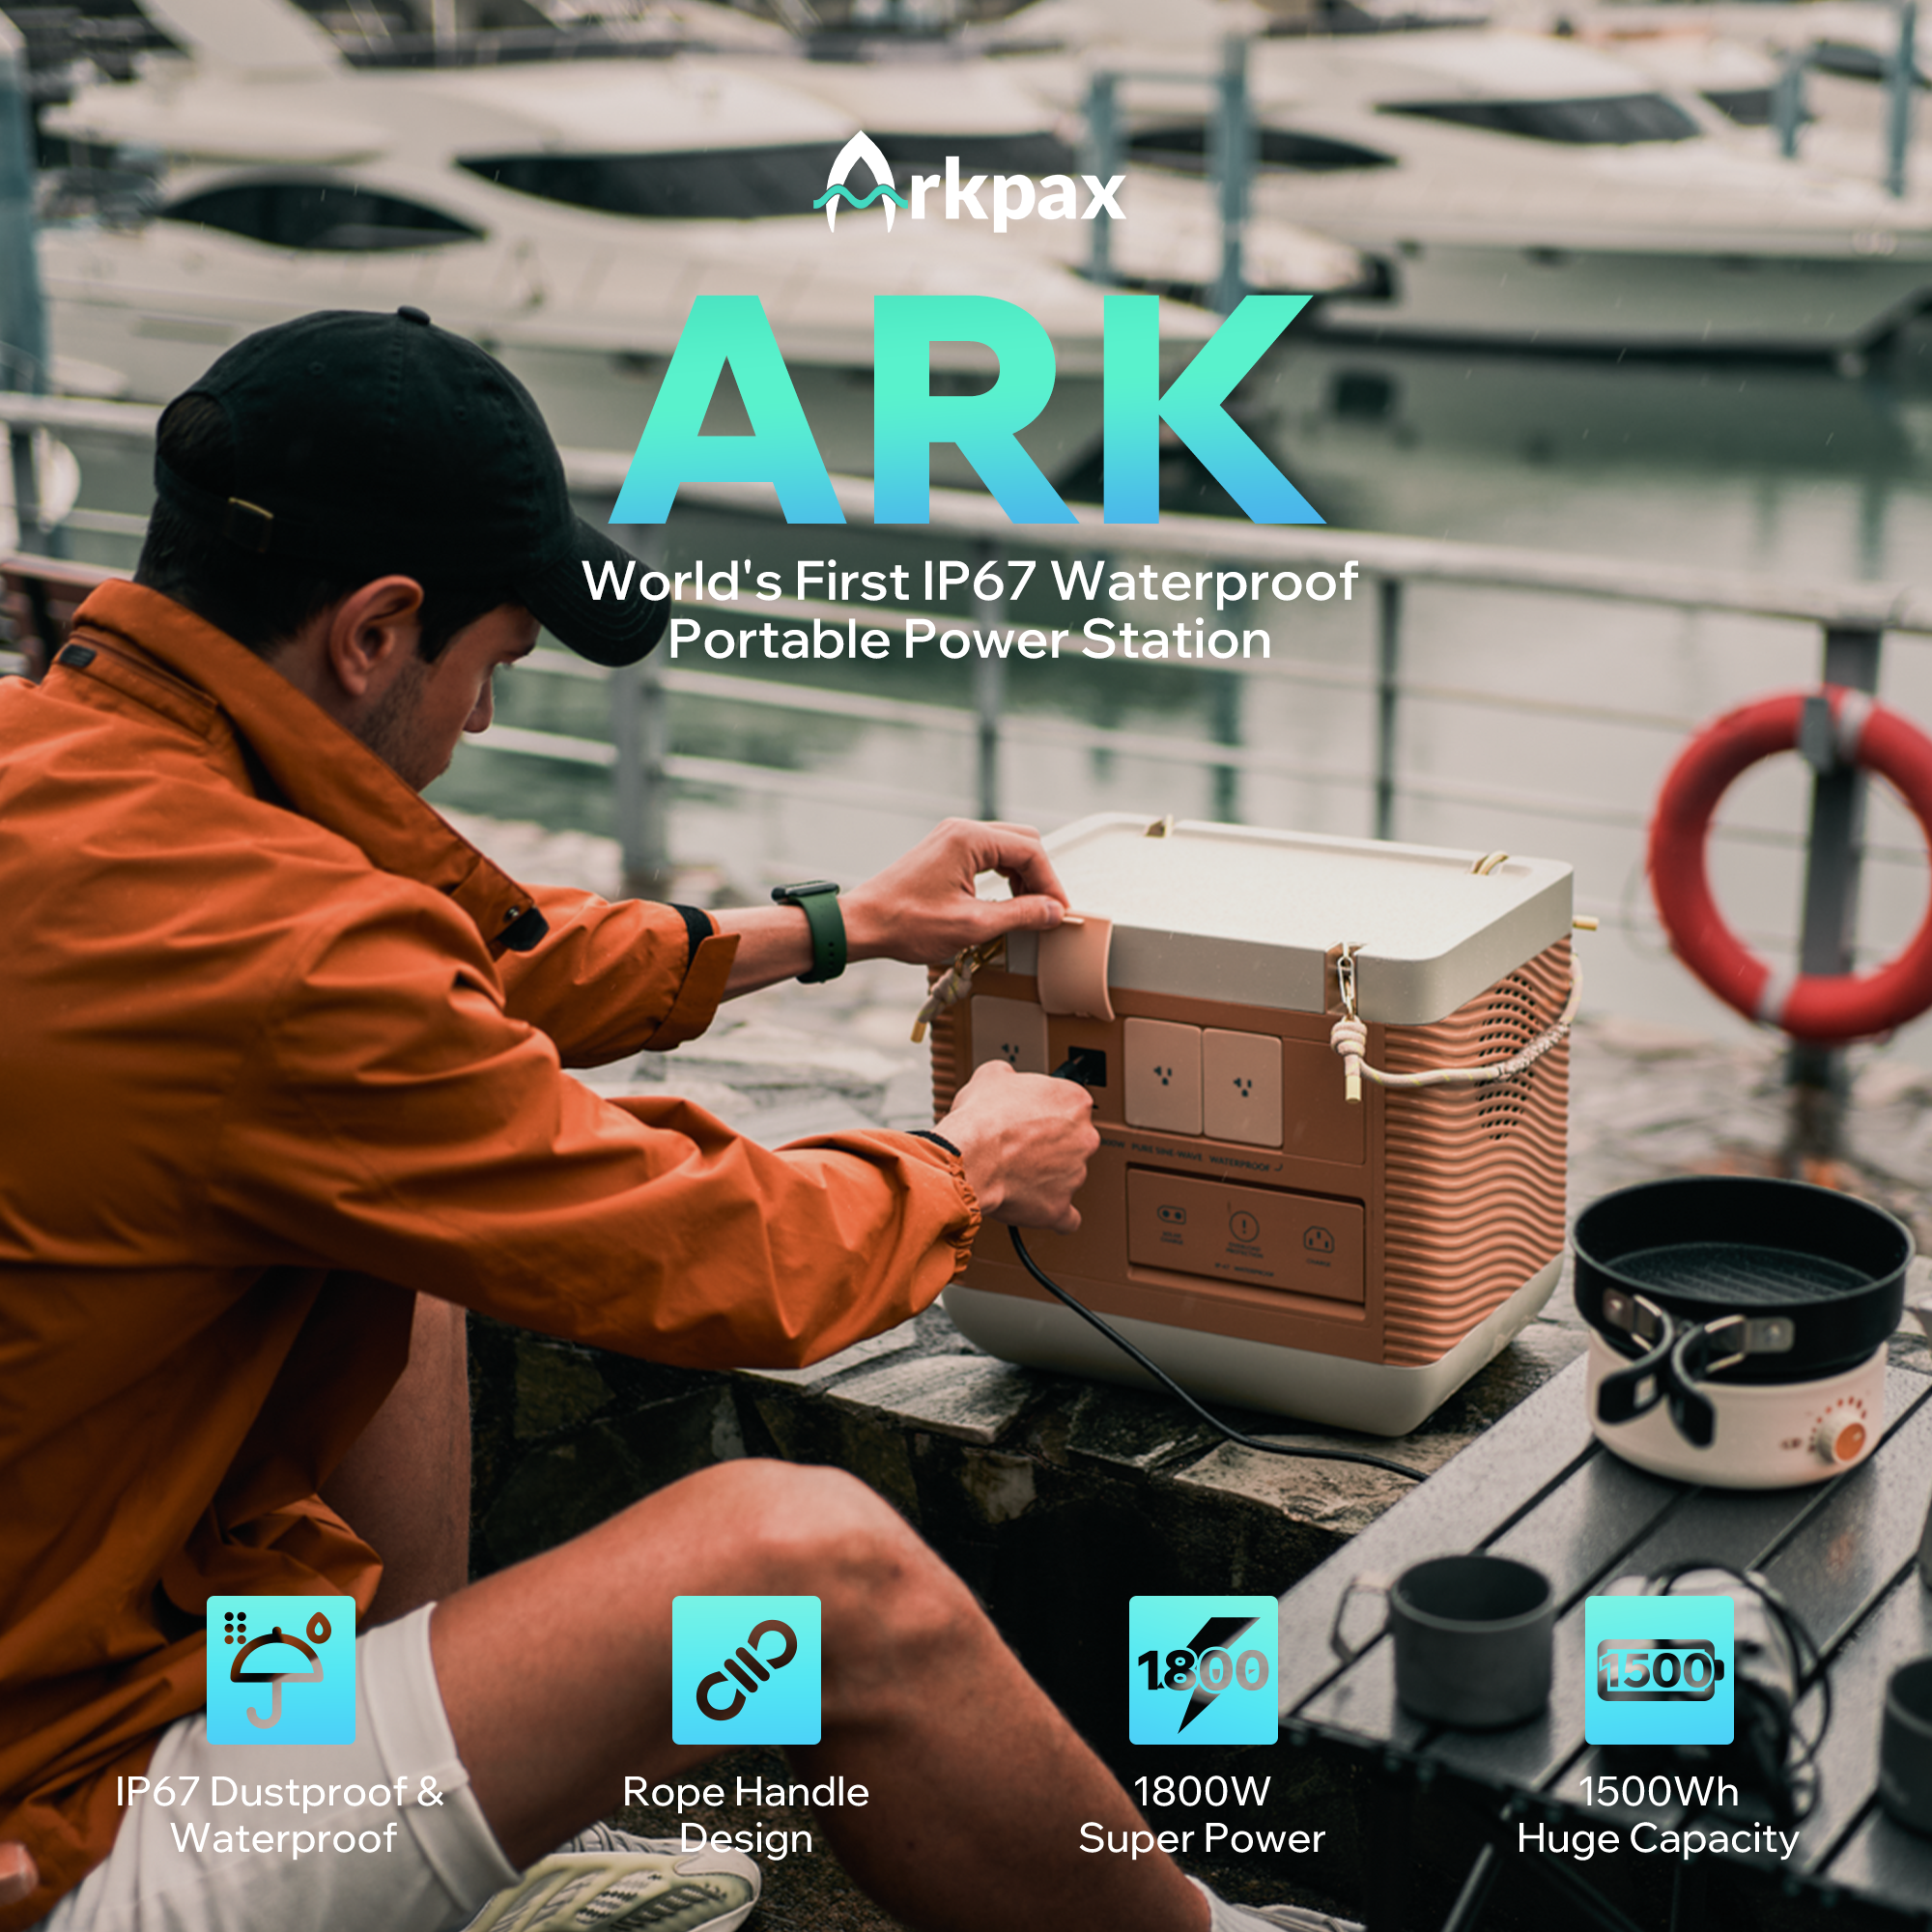 Presenting the Arkpax Ark 1800W: Redefining Portable Power Stations for Extended Maritime Excursions